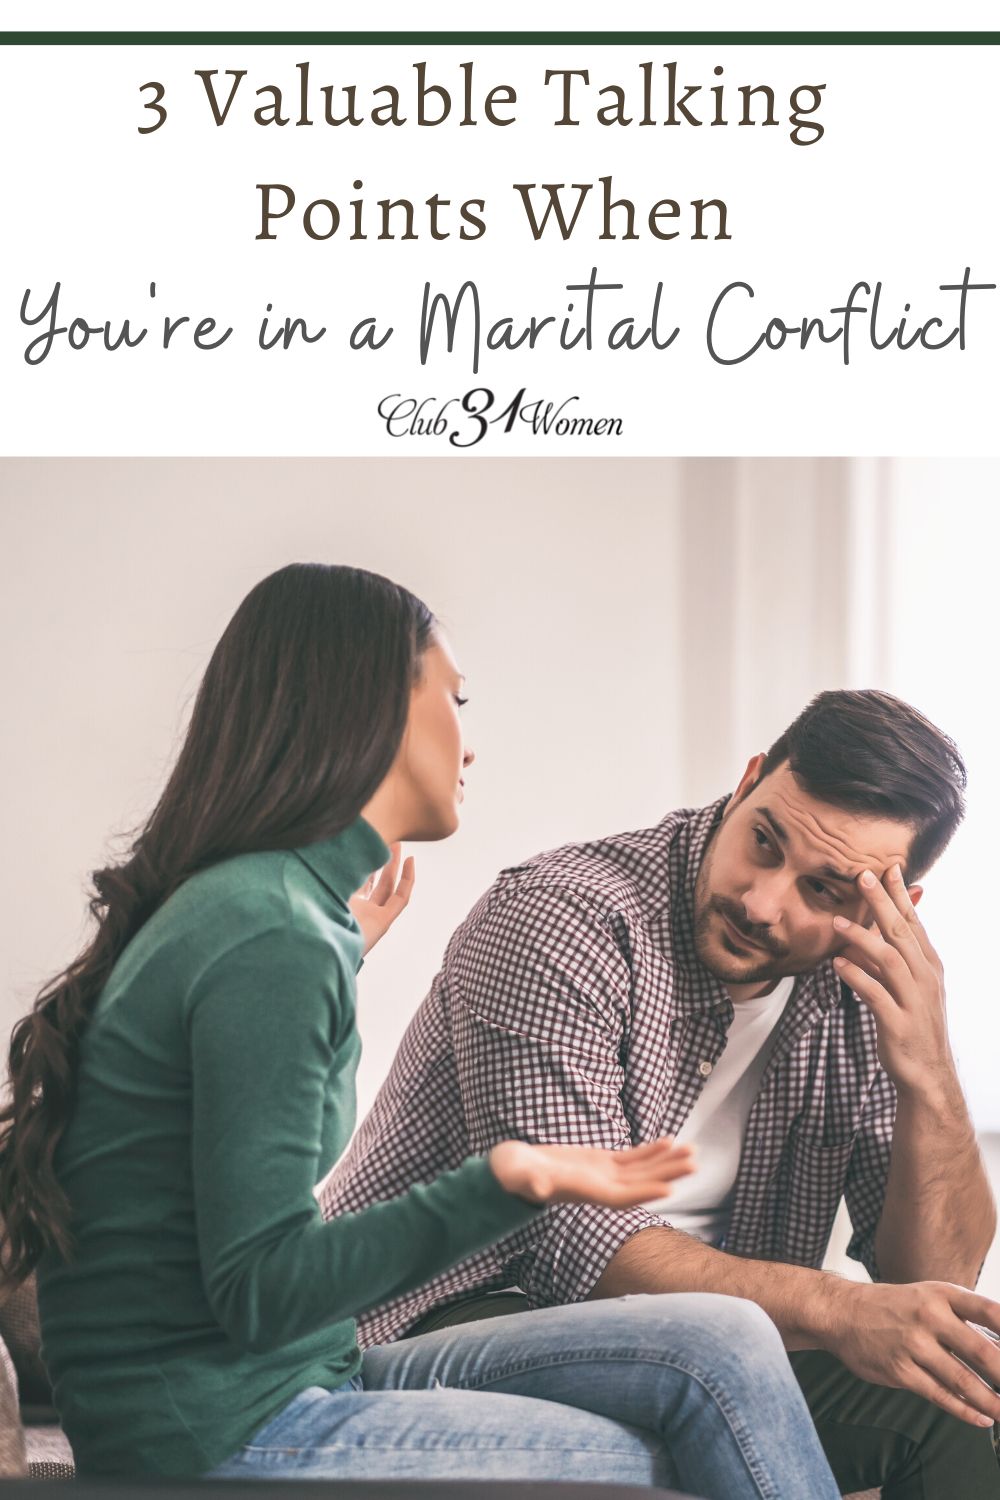 Marital conflict is inevitable but there are ways to gain a deeper understanding of why you may be in conflict in the first place. via @Club31Women